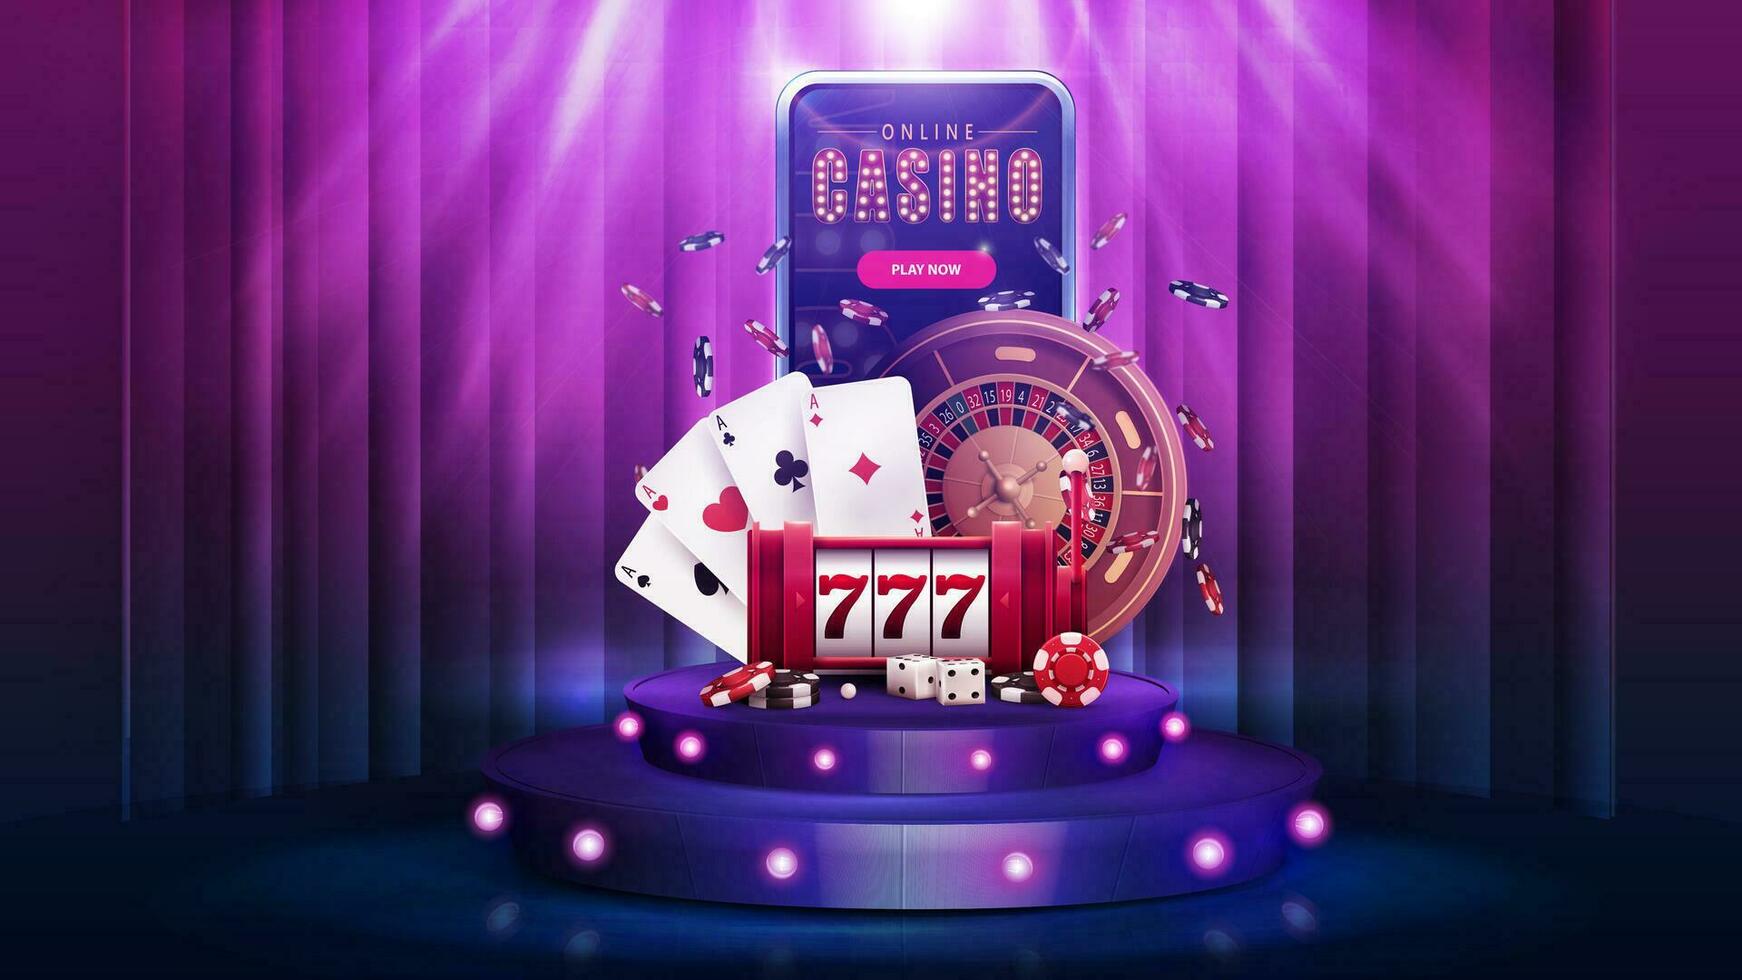 Purple round podium with smartphone, casino slot machine, roulette wheel, poker chips and playing cards on background with curtain and spotlight vector